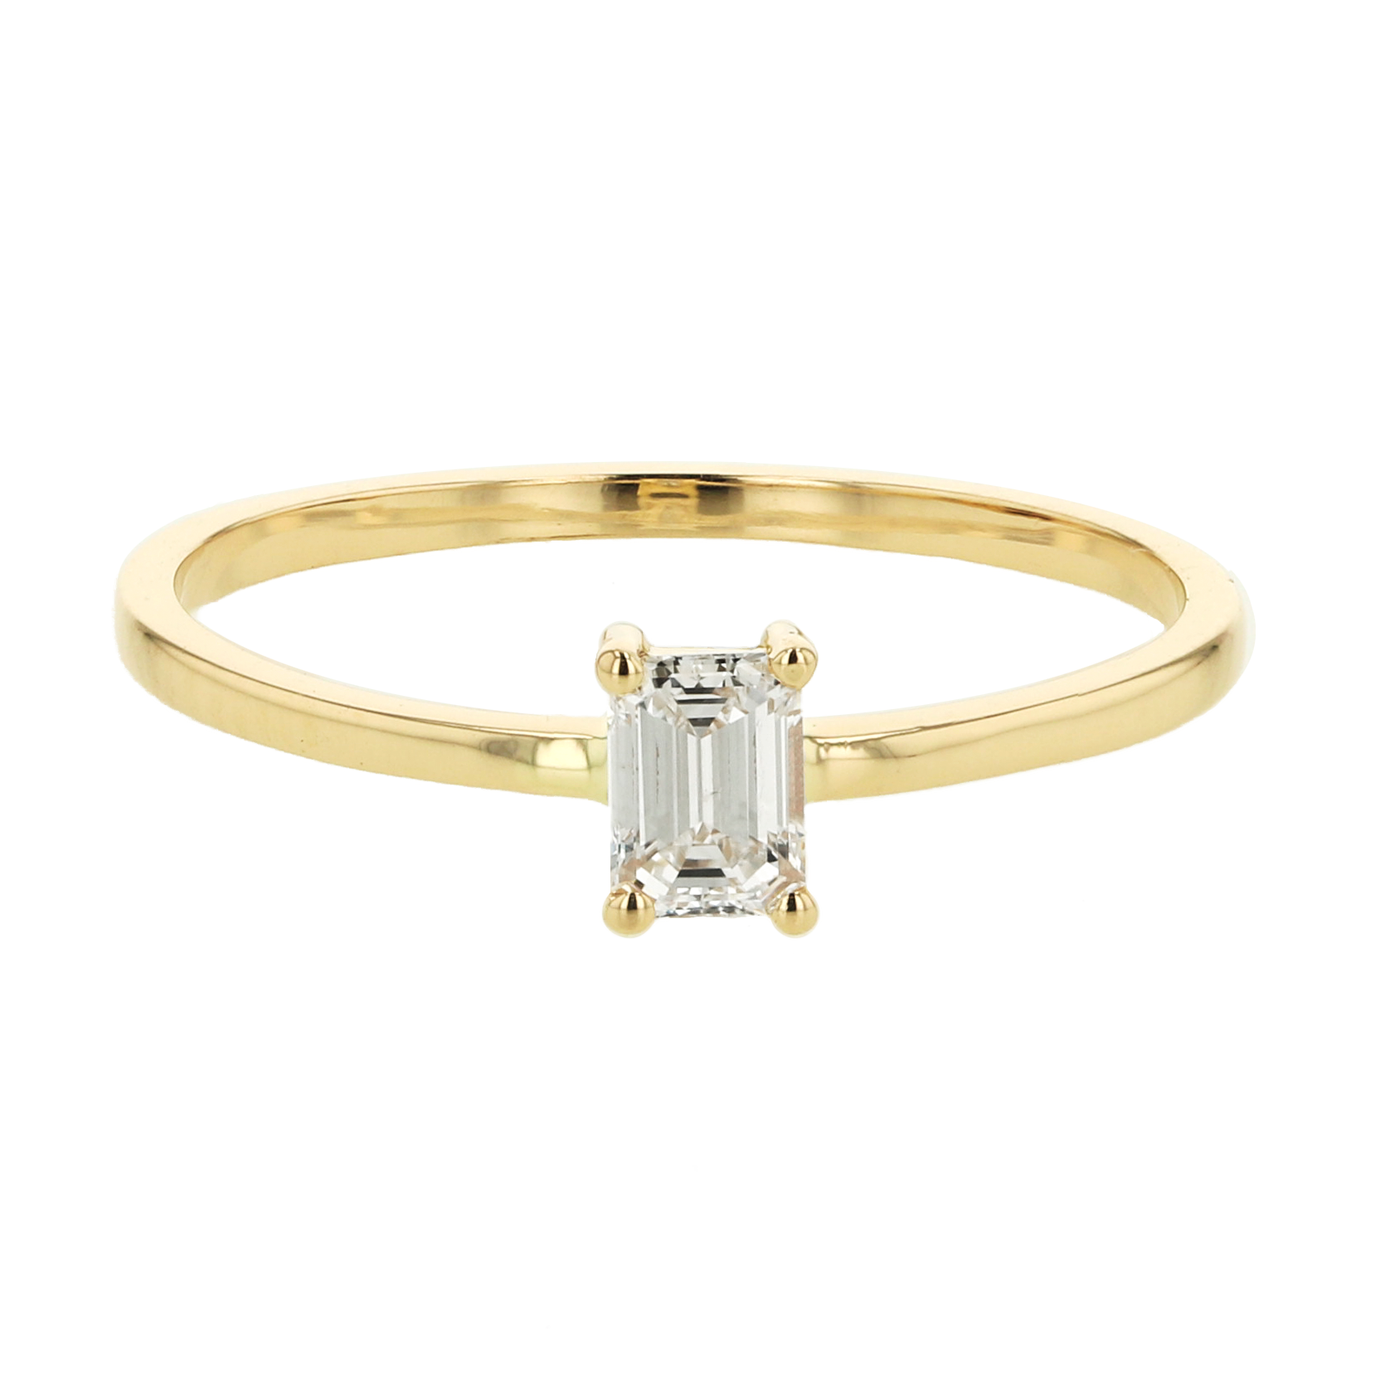 0.28 CT Emerald Cut Solitaire Diamond Ring in 14K Yellow Gold